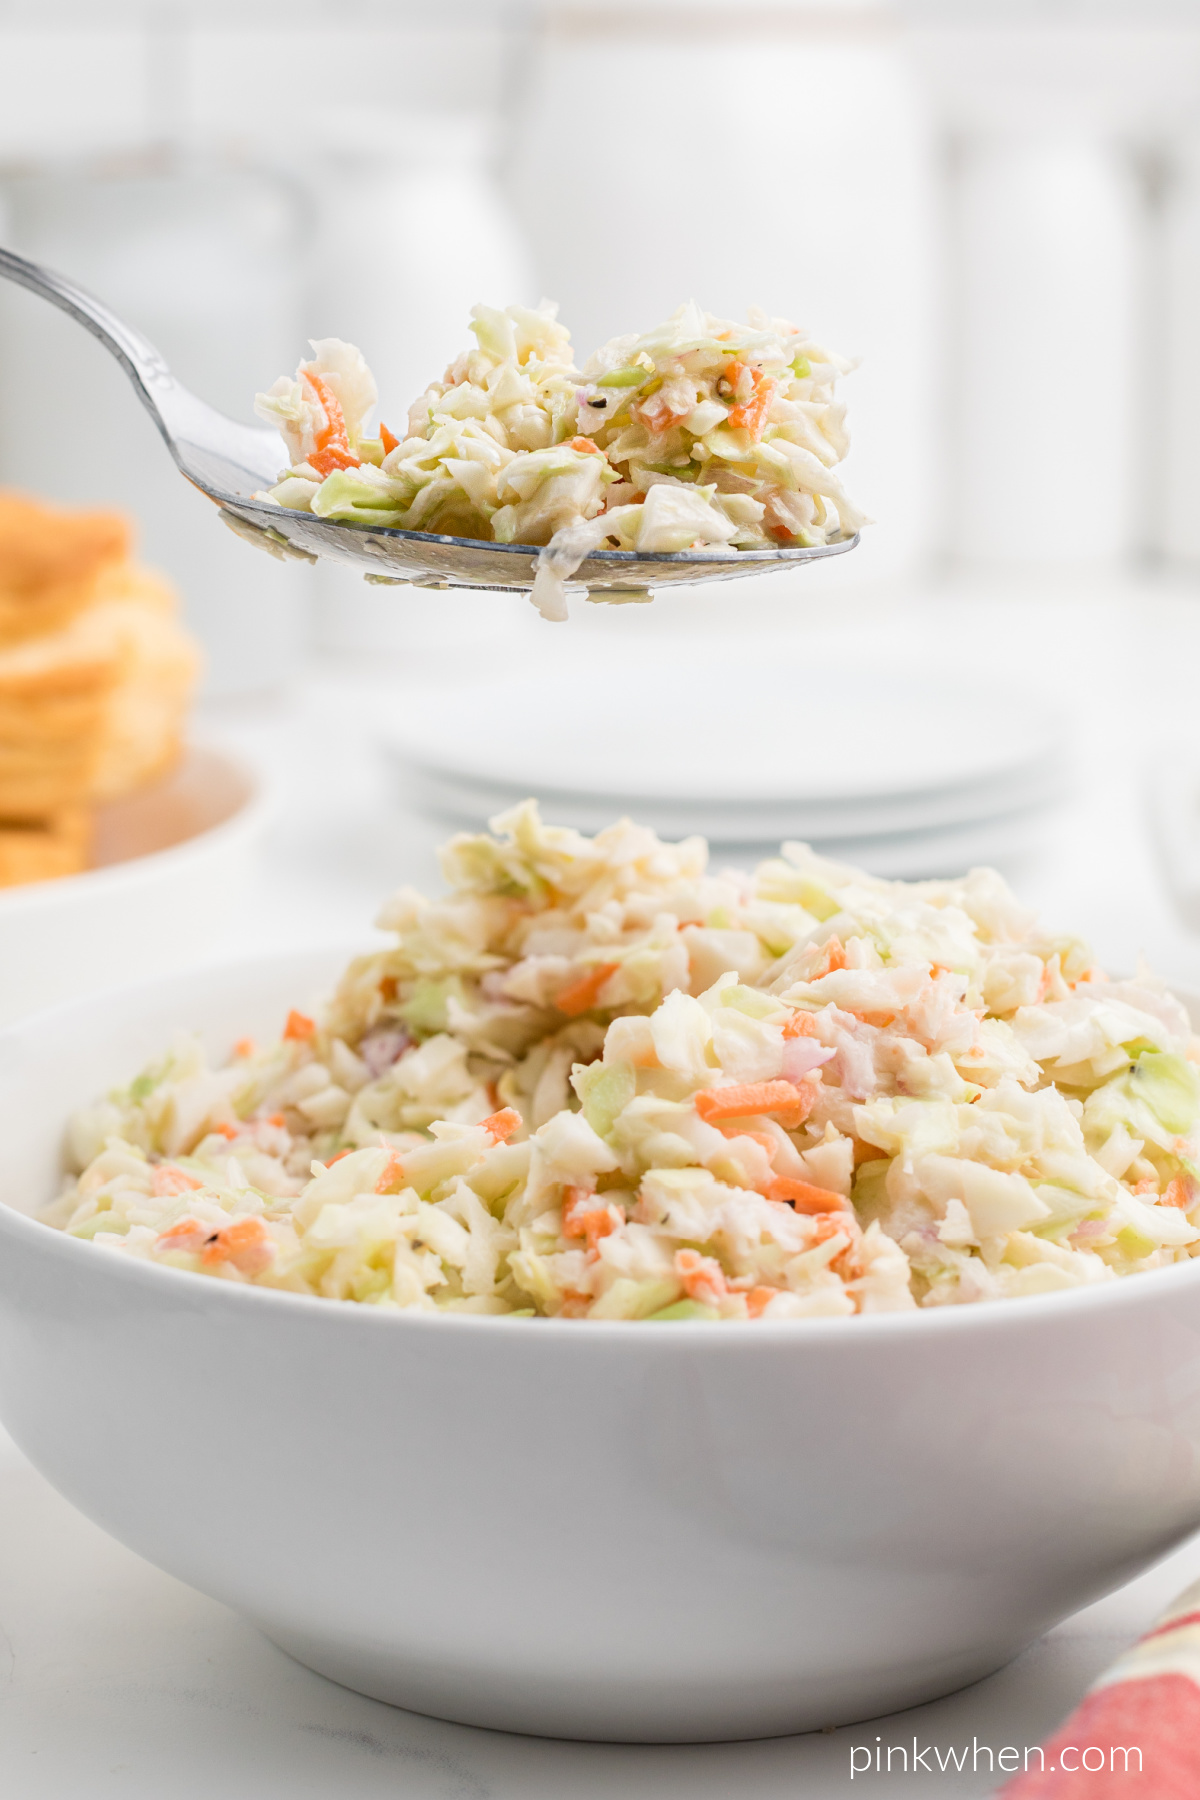 Bite shot of coleslaw on a spoon with a bowl of coleslaw underneath.